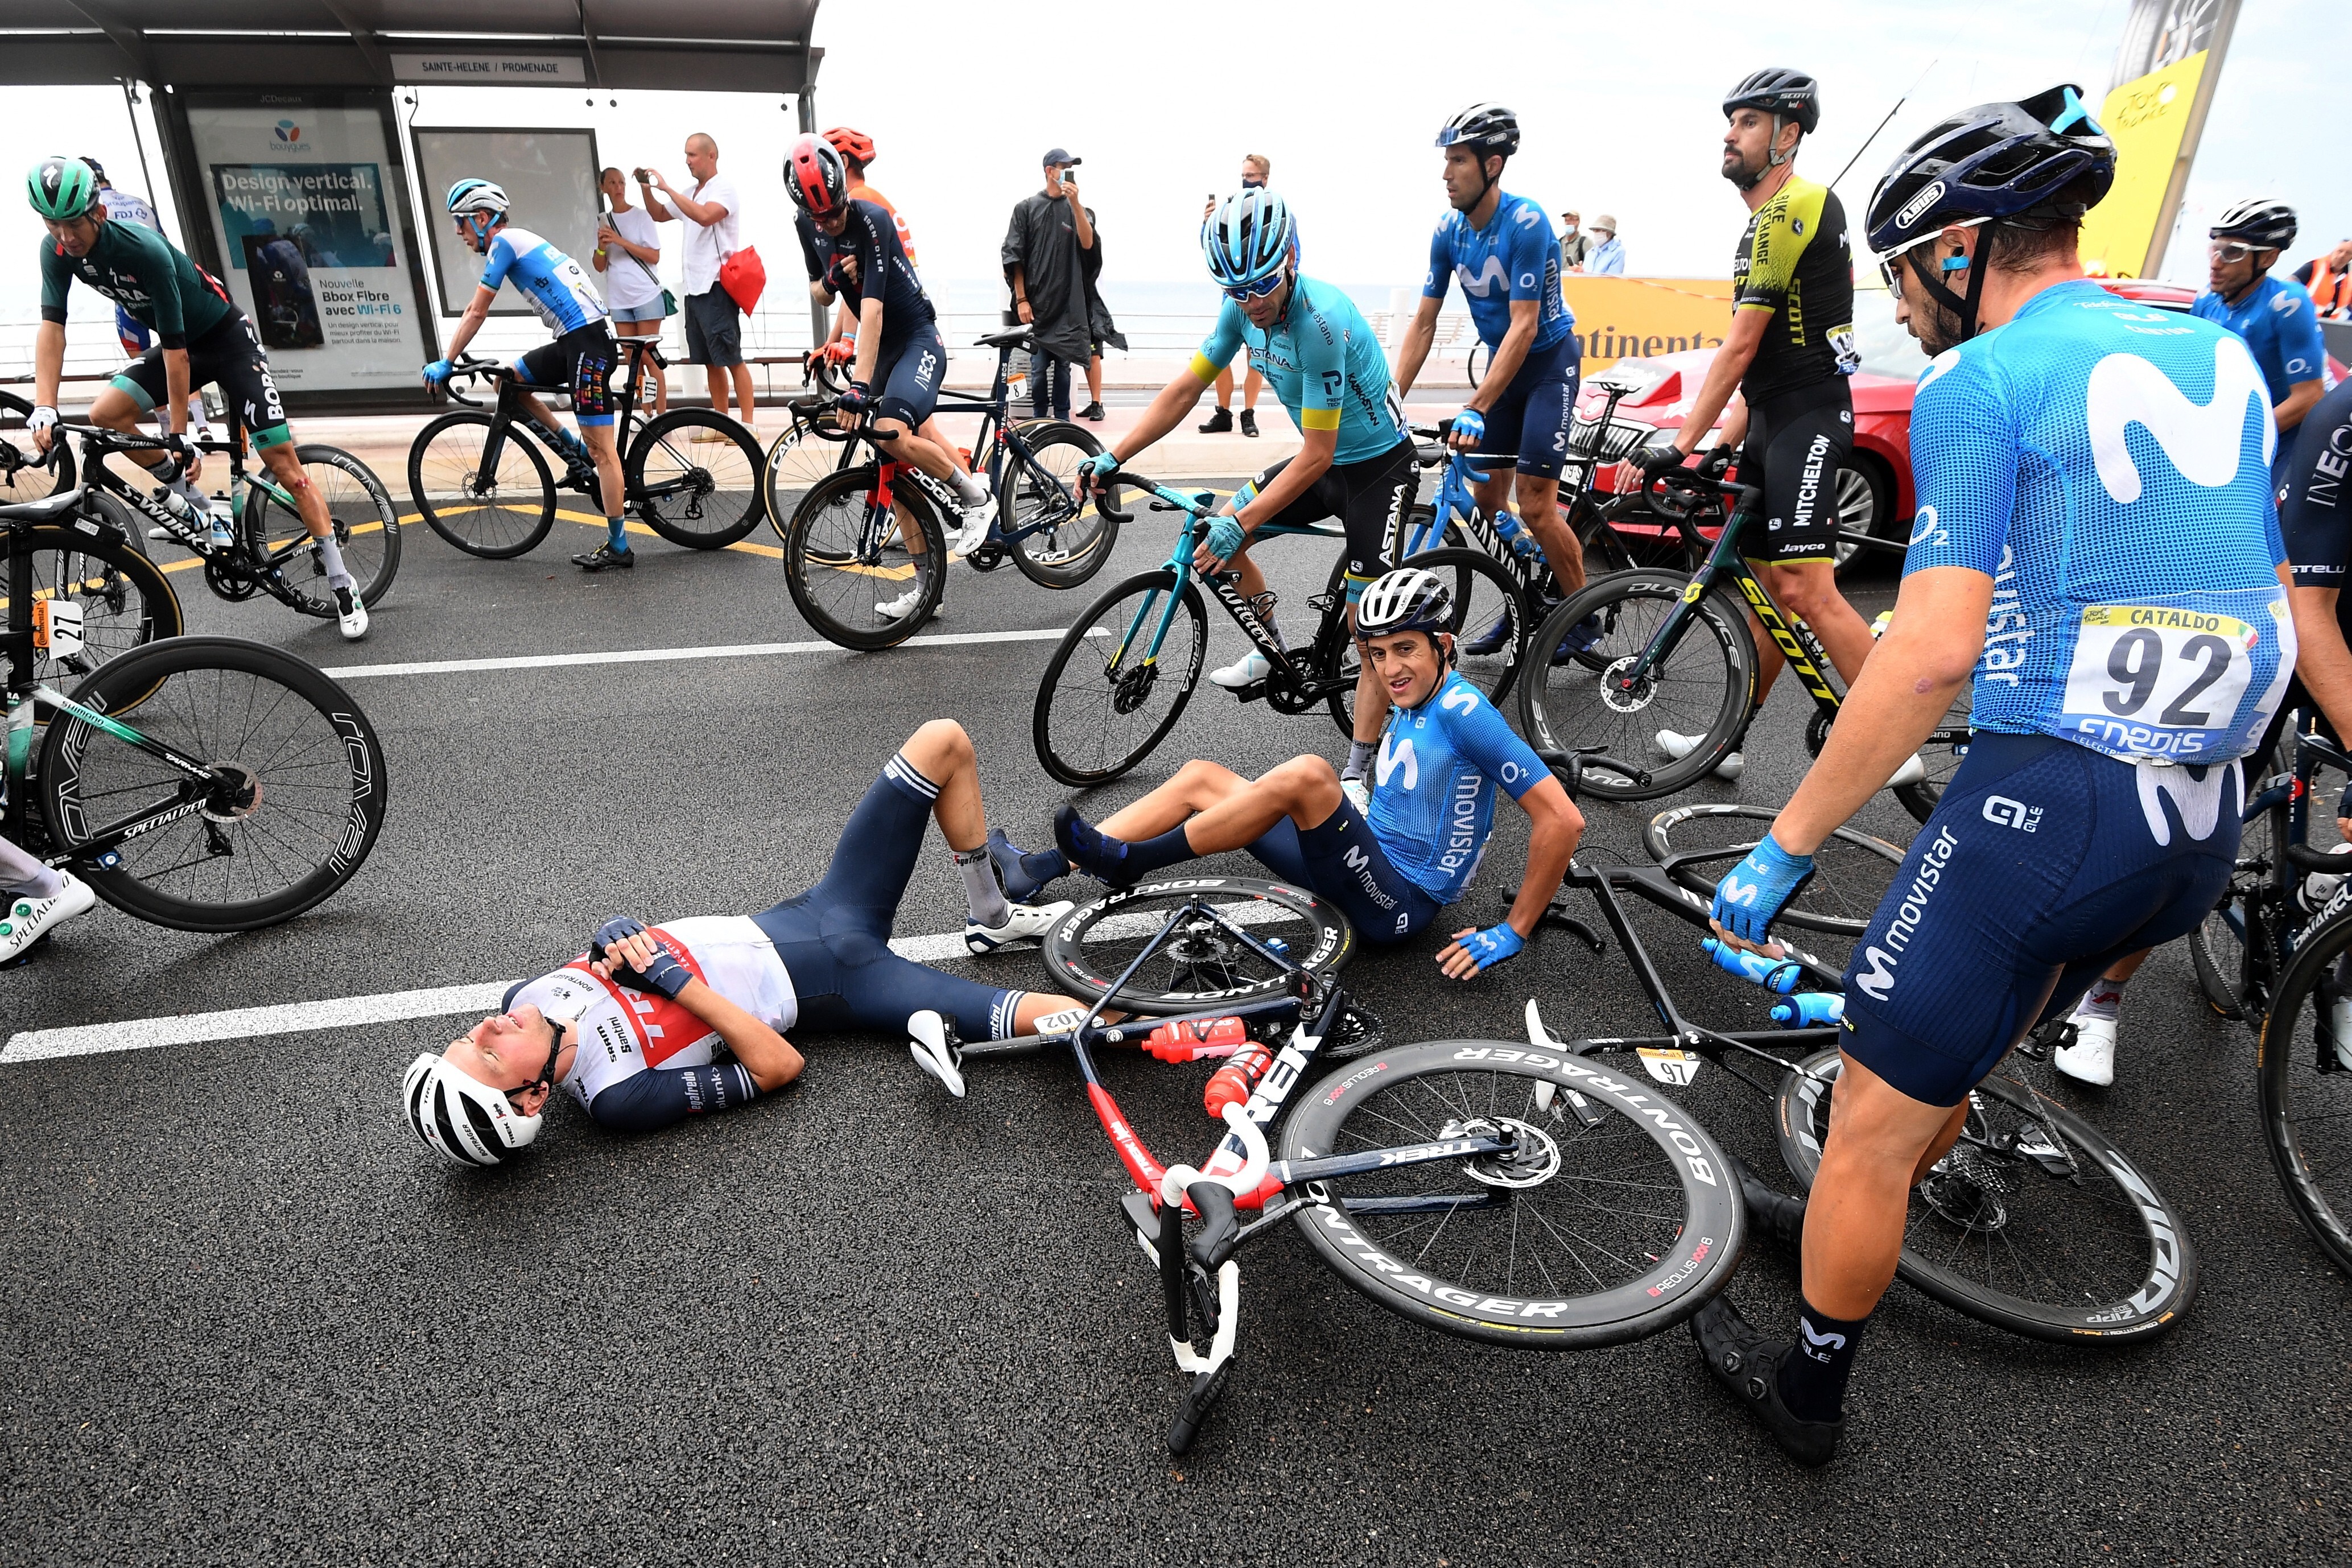 Danish rider Niklas Eg (left) of Trek-Segafredo team and Spanish rider Marc Soler (right) of Movistar Team lie on the road, one of many crashes during stage one of the Tour de France. Photo: EPA